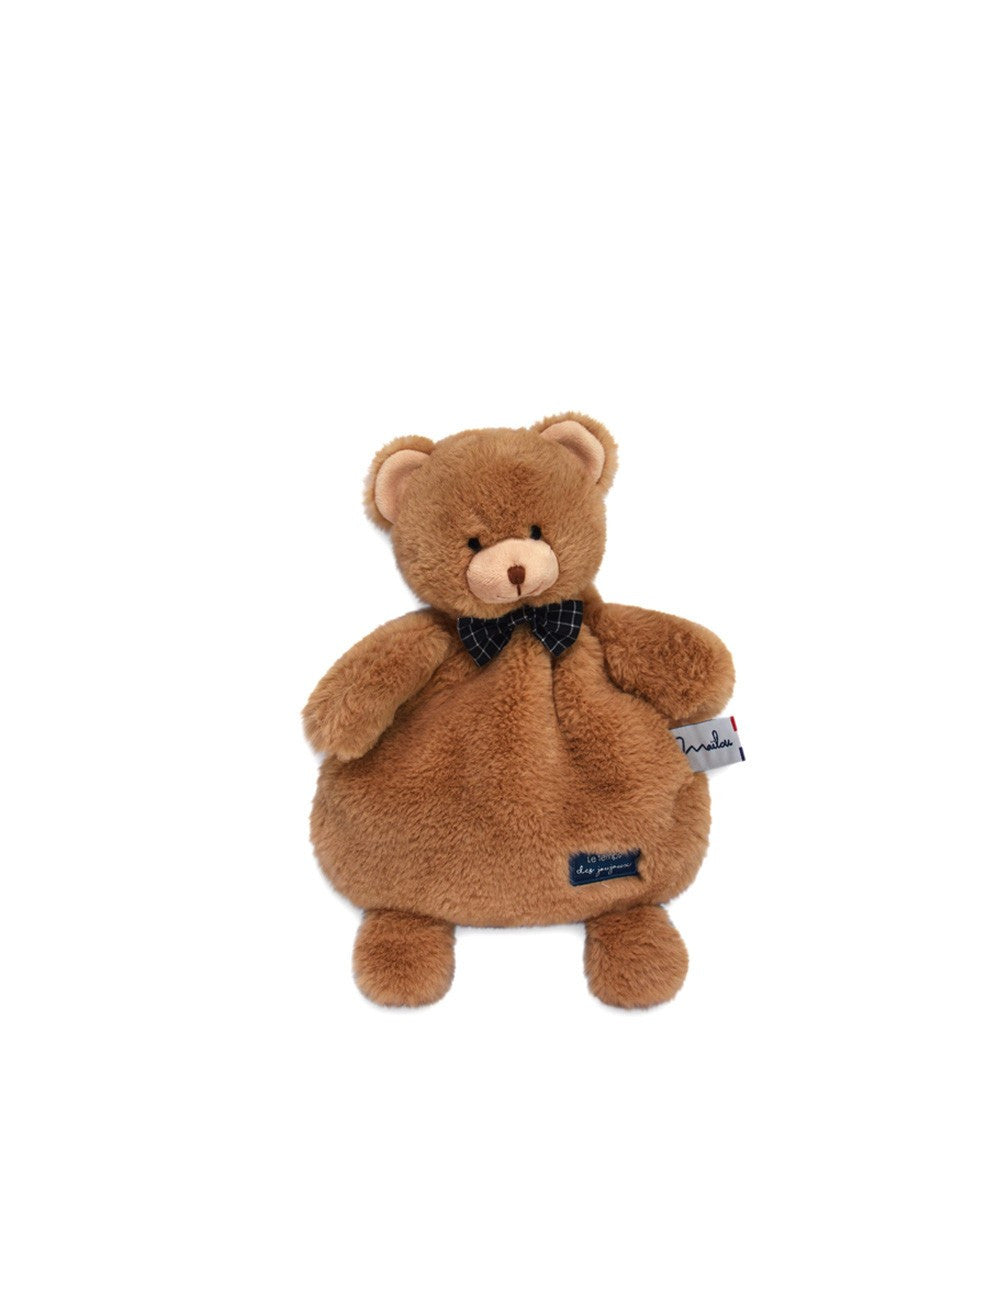 Doudou Hot Water Bottles Made in France - Mailou Tradition